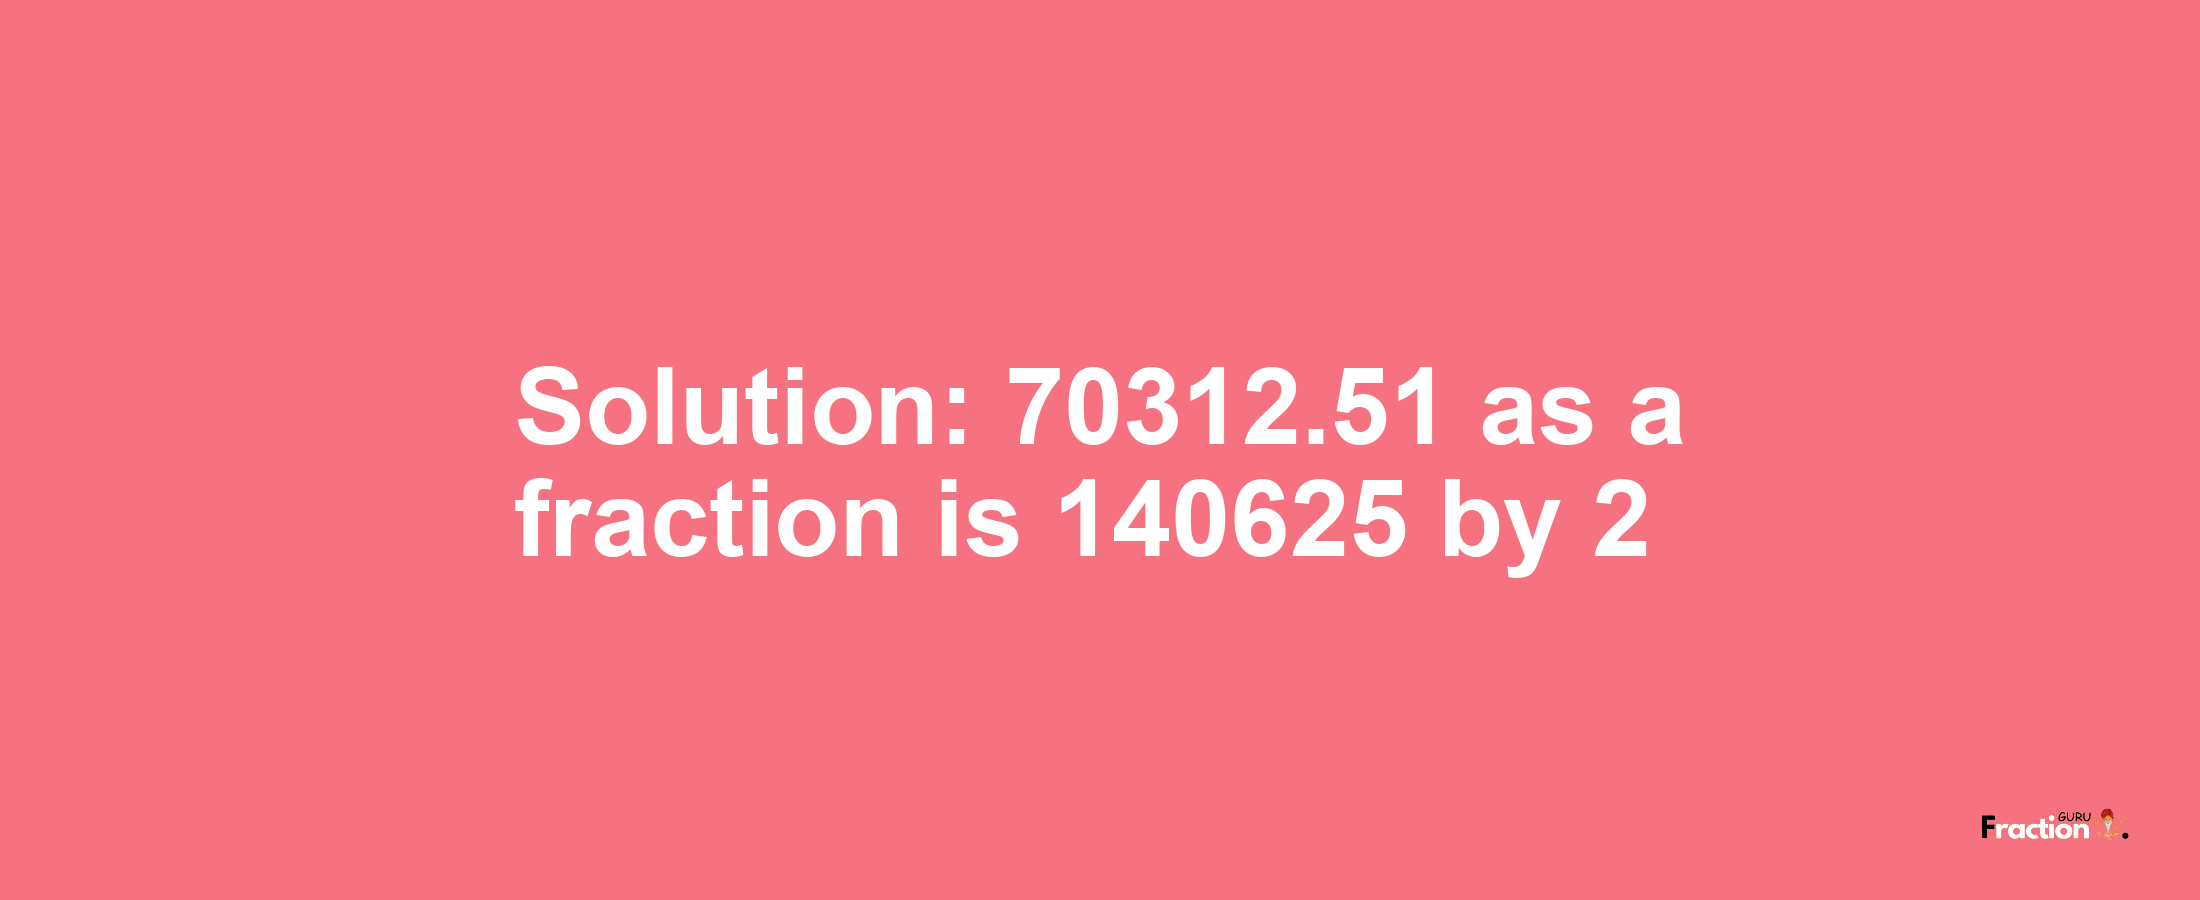 Solution:70312.51 as a fraction is 140625/2